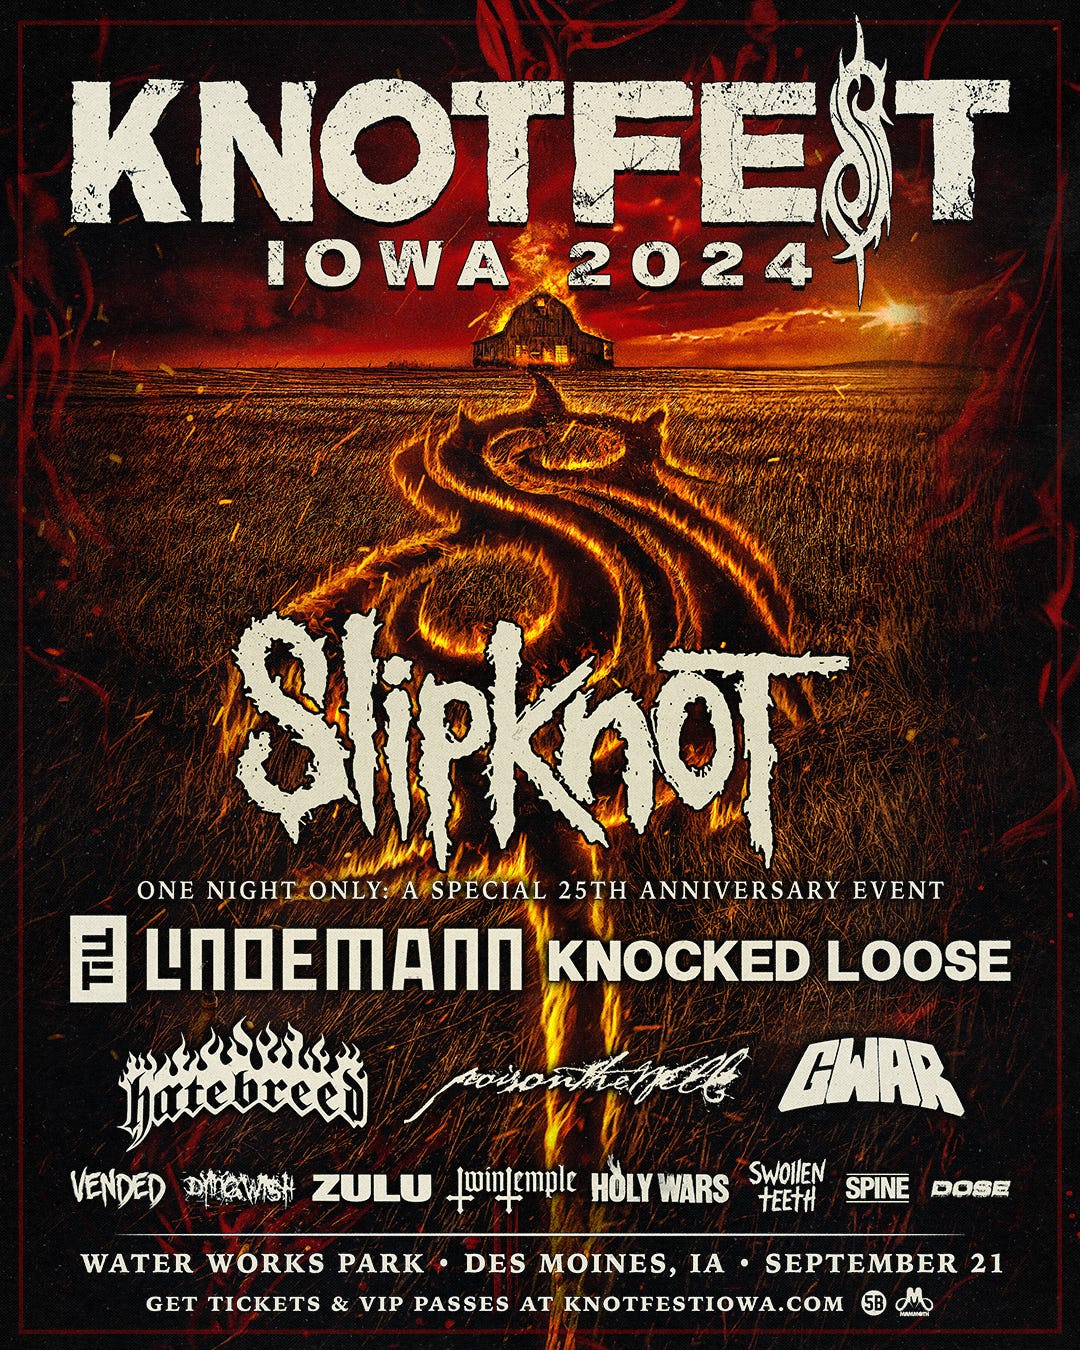 Slipknot announces Here Comes the Pain concert tour, return of Knotfest: How to get tickets